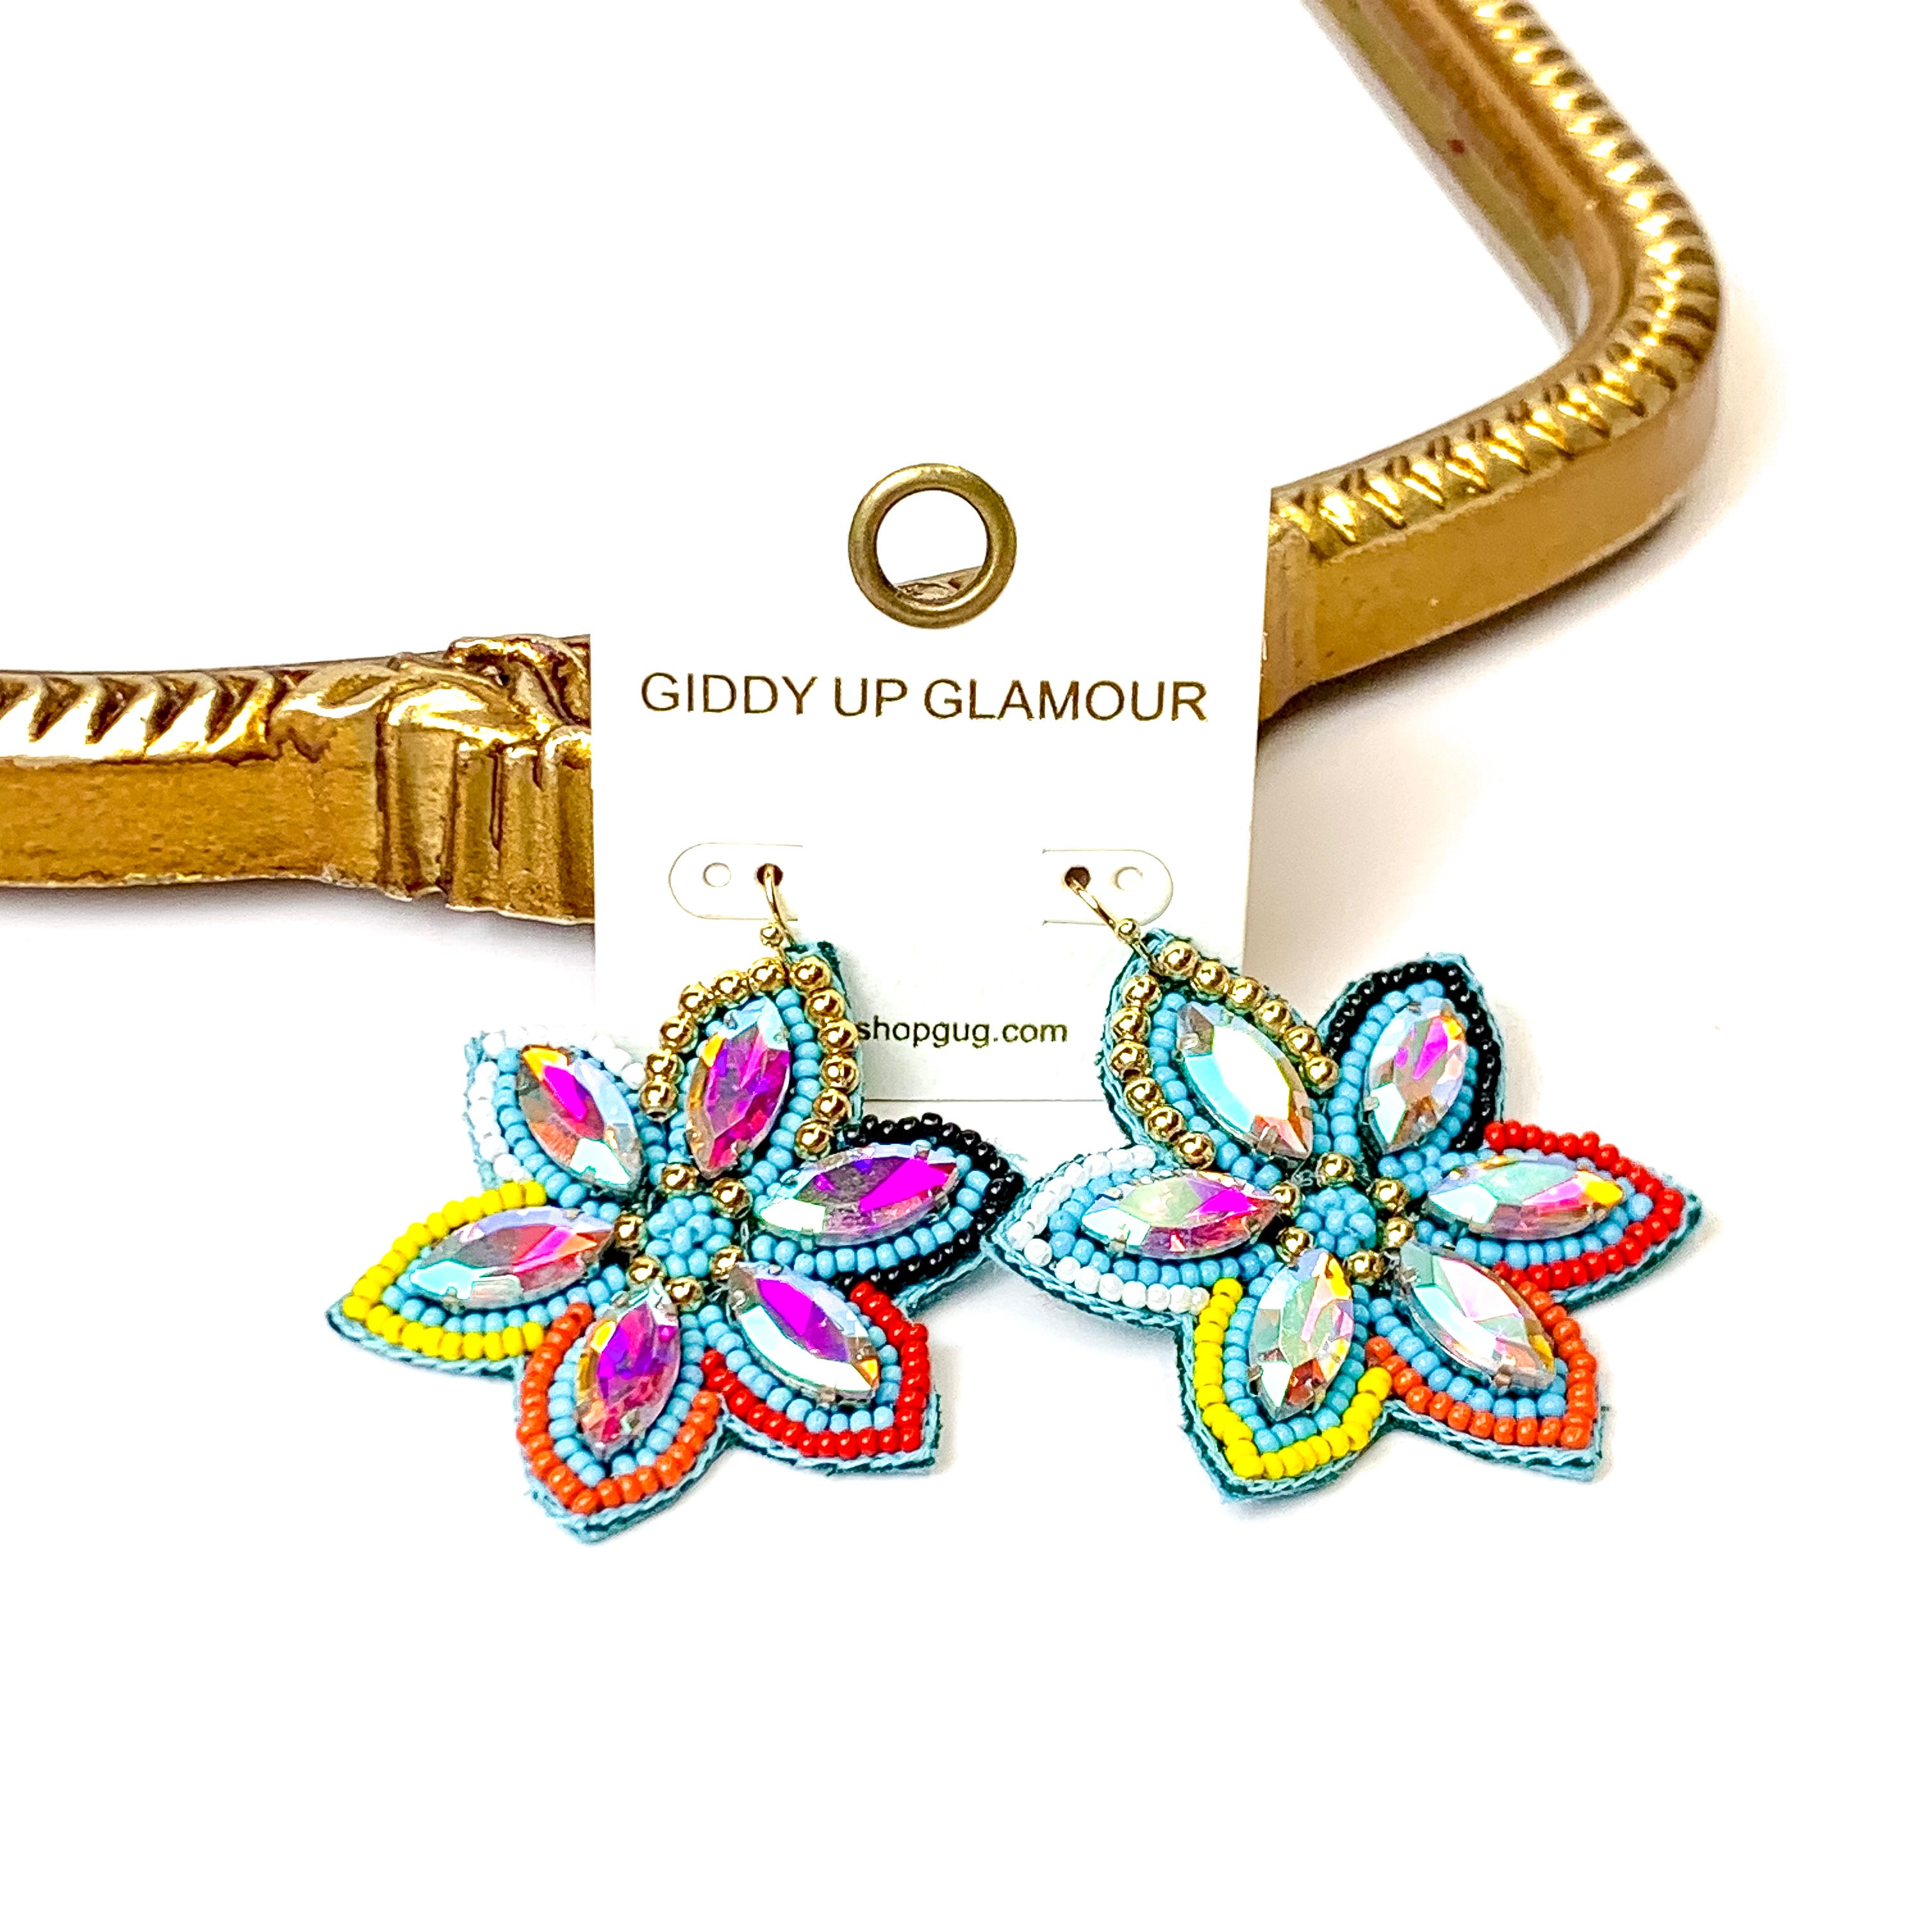 Desert Daisy Multicolored Flower Shaped Earrings with AB Crystal Accents in Turquoise Blue